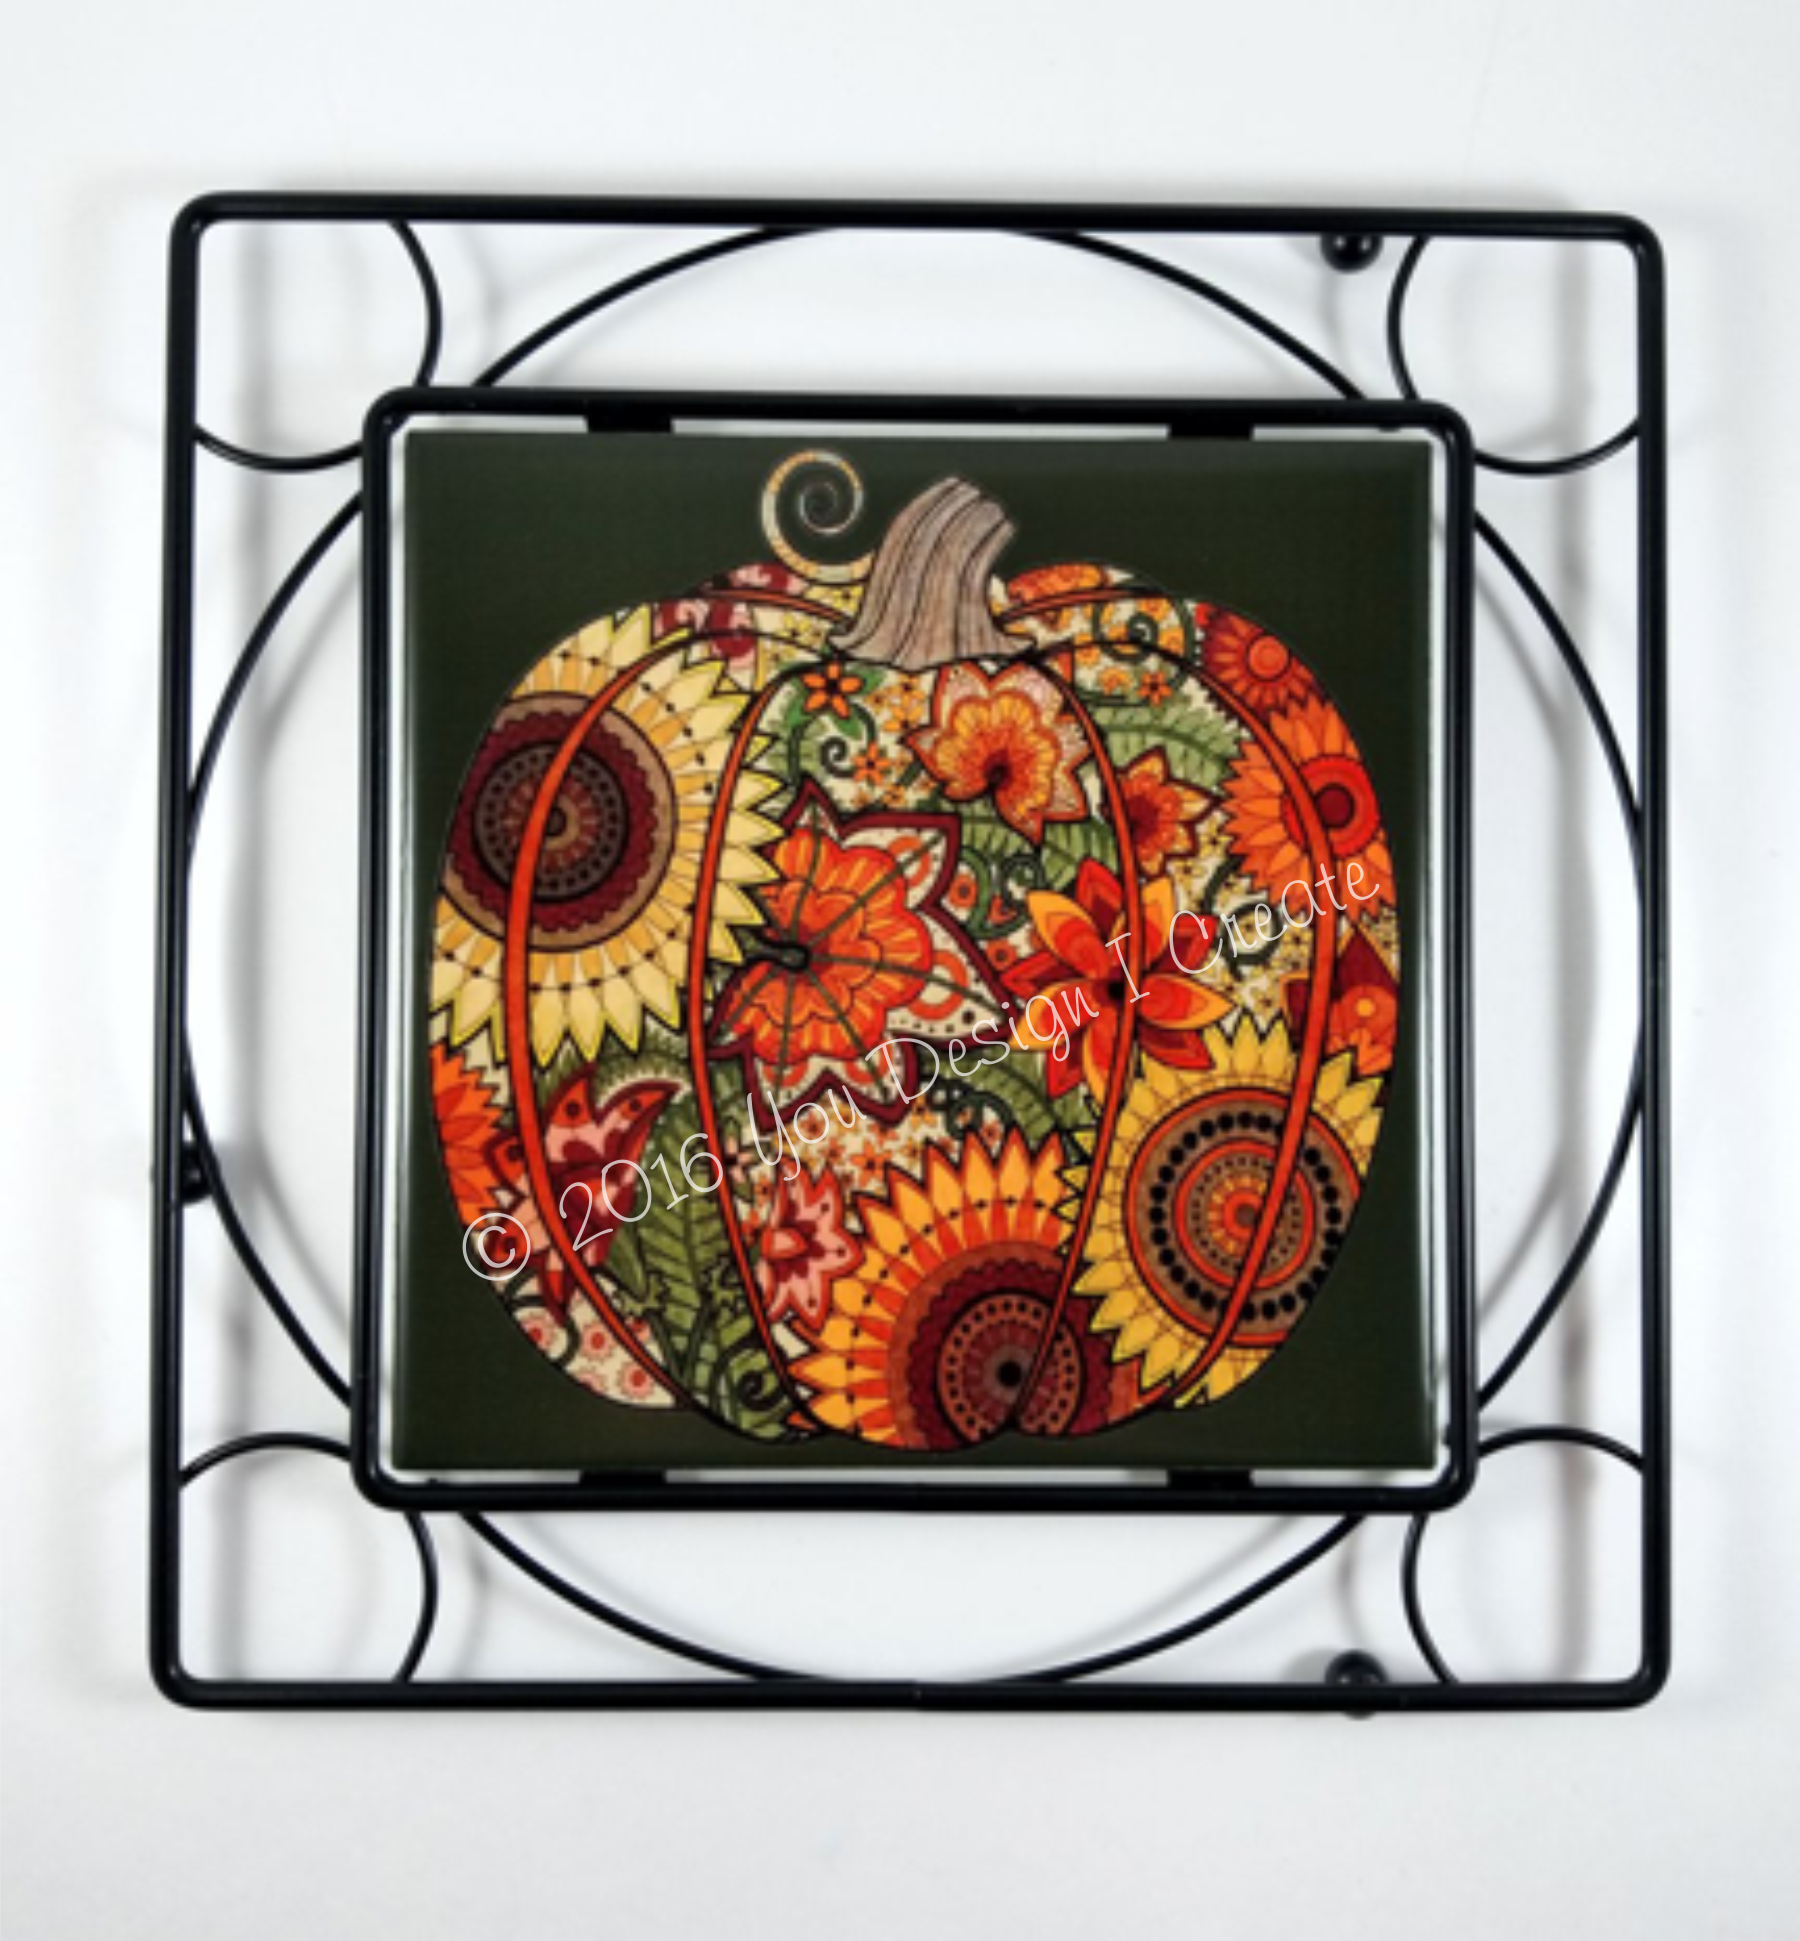 Pumpkin Harvest Trivet (Fall Palette Decoration contest) made with sublimation printing